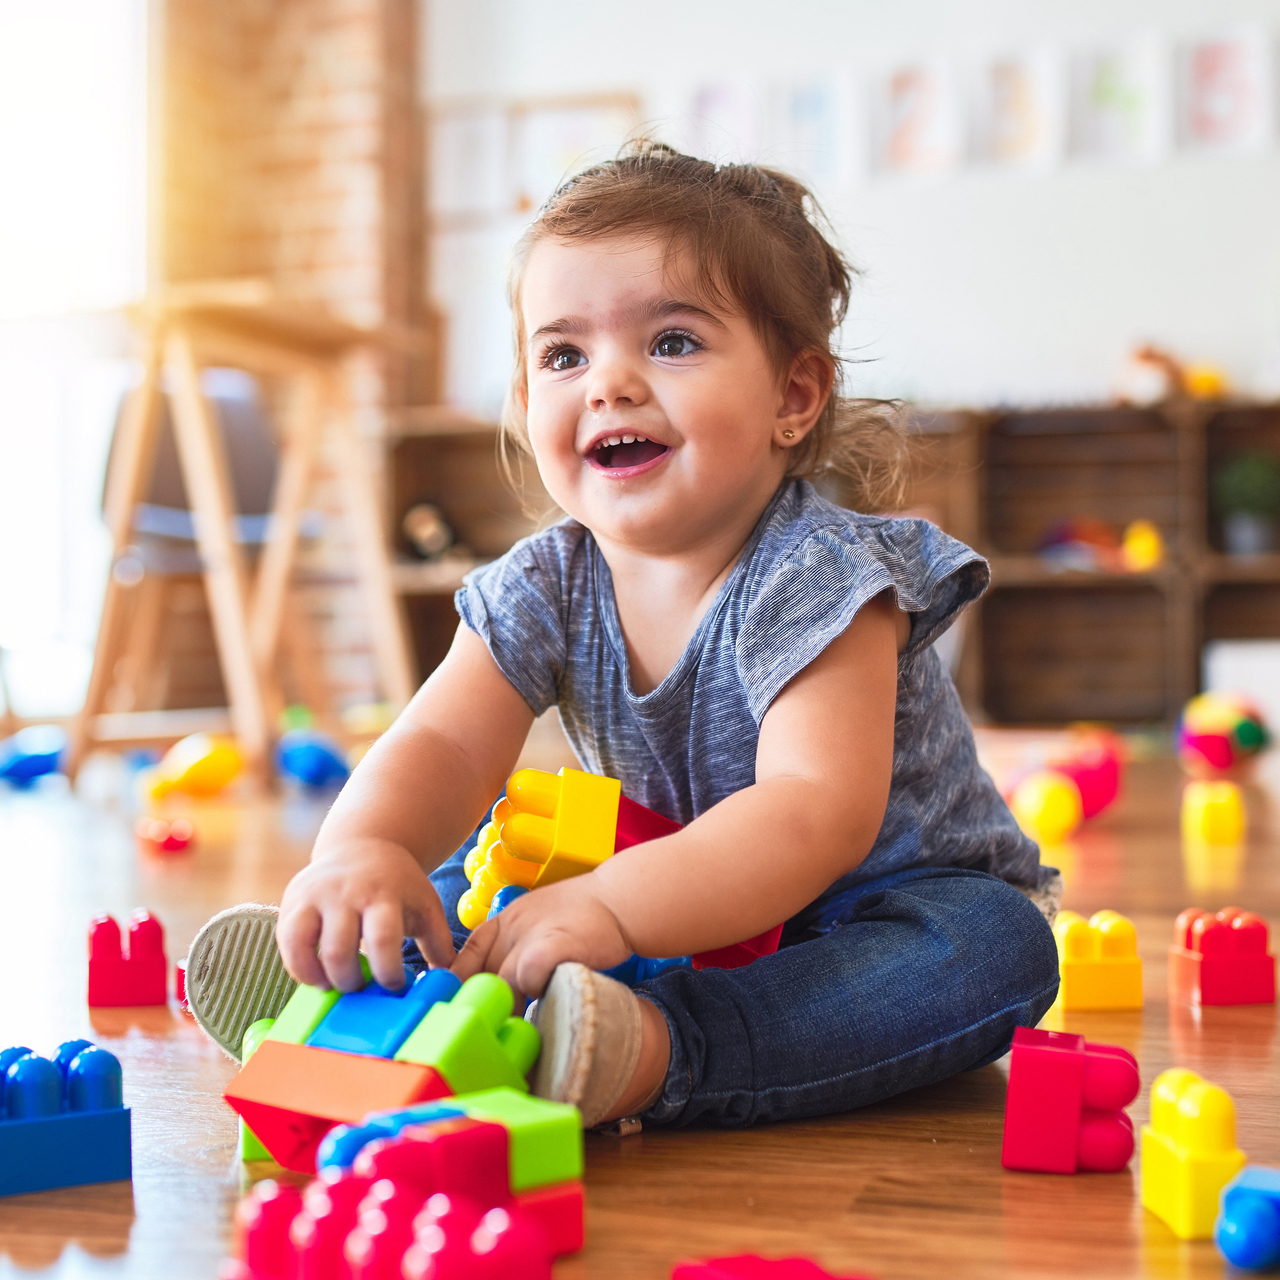 Understand the building blocks of education for infants.